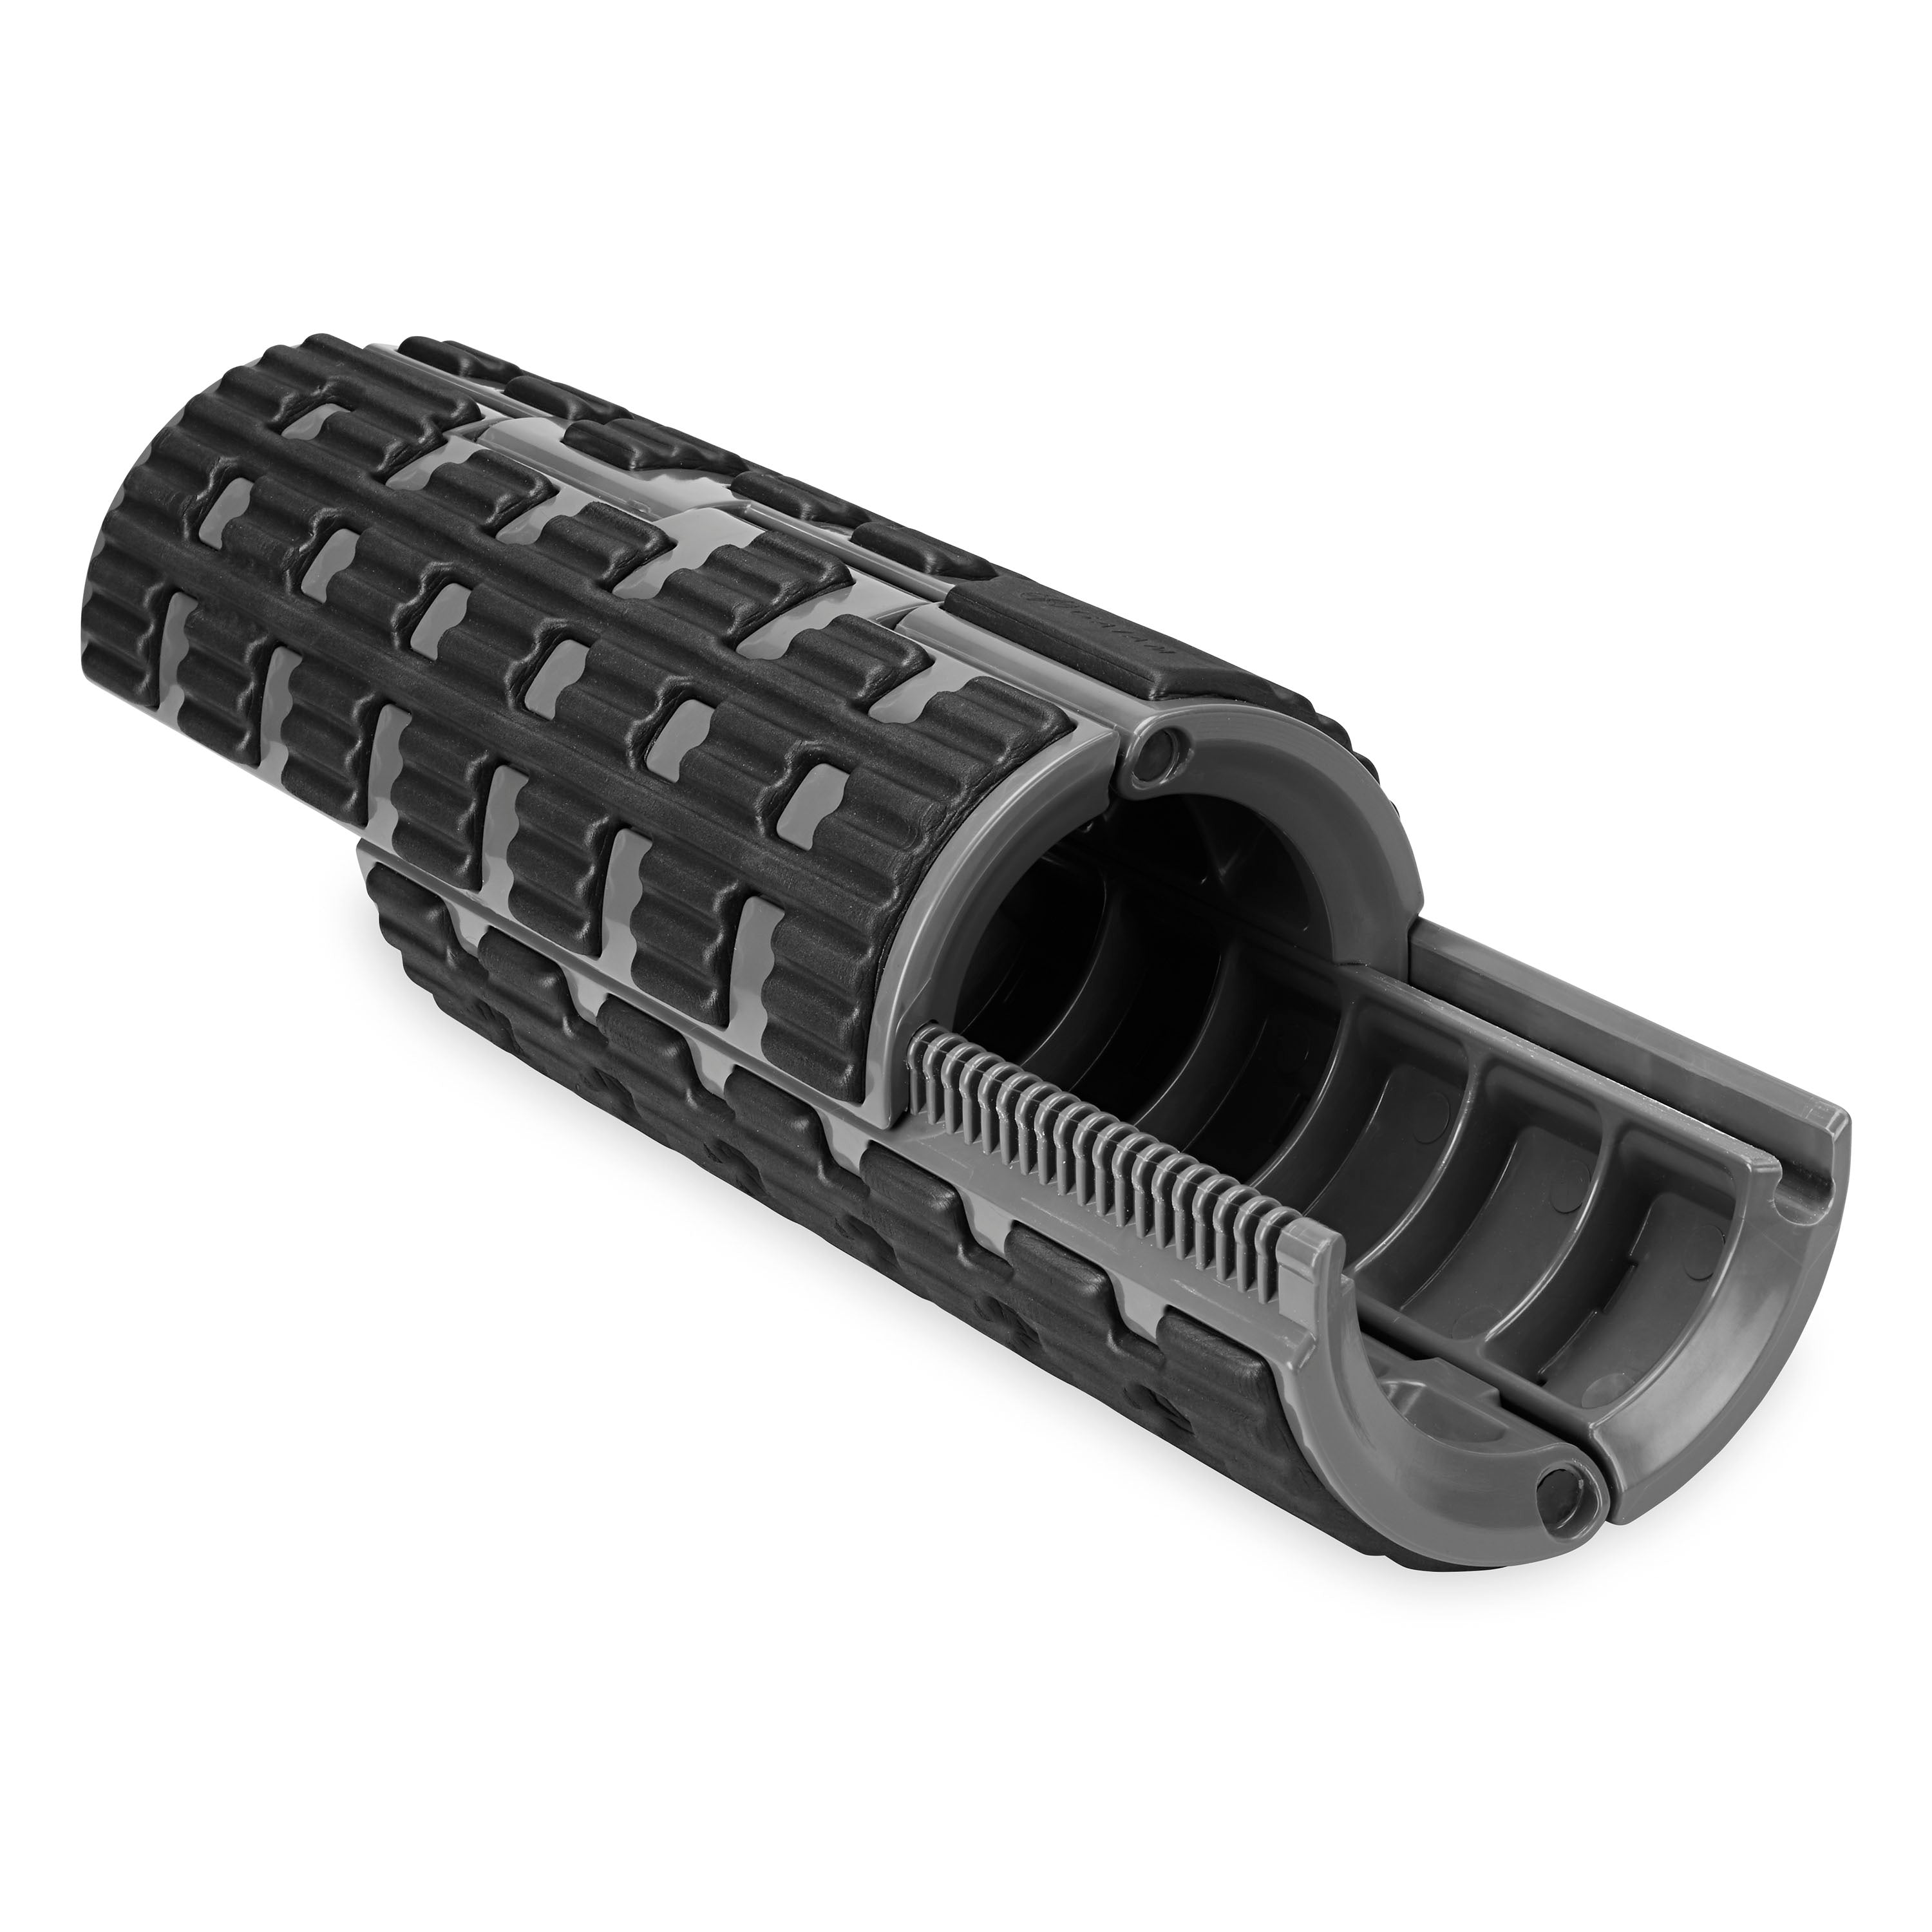 Foam Rollers Exercise And Muscle Roller Pilates Foam Cylinder Spri